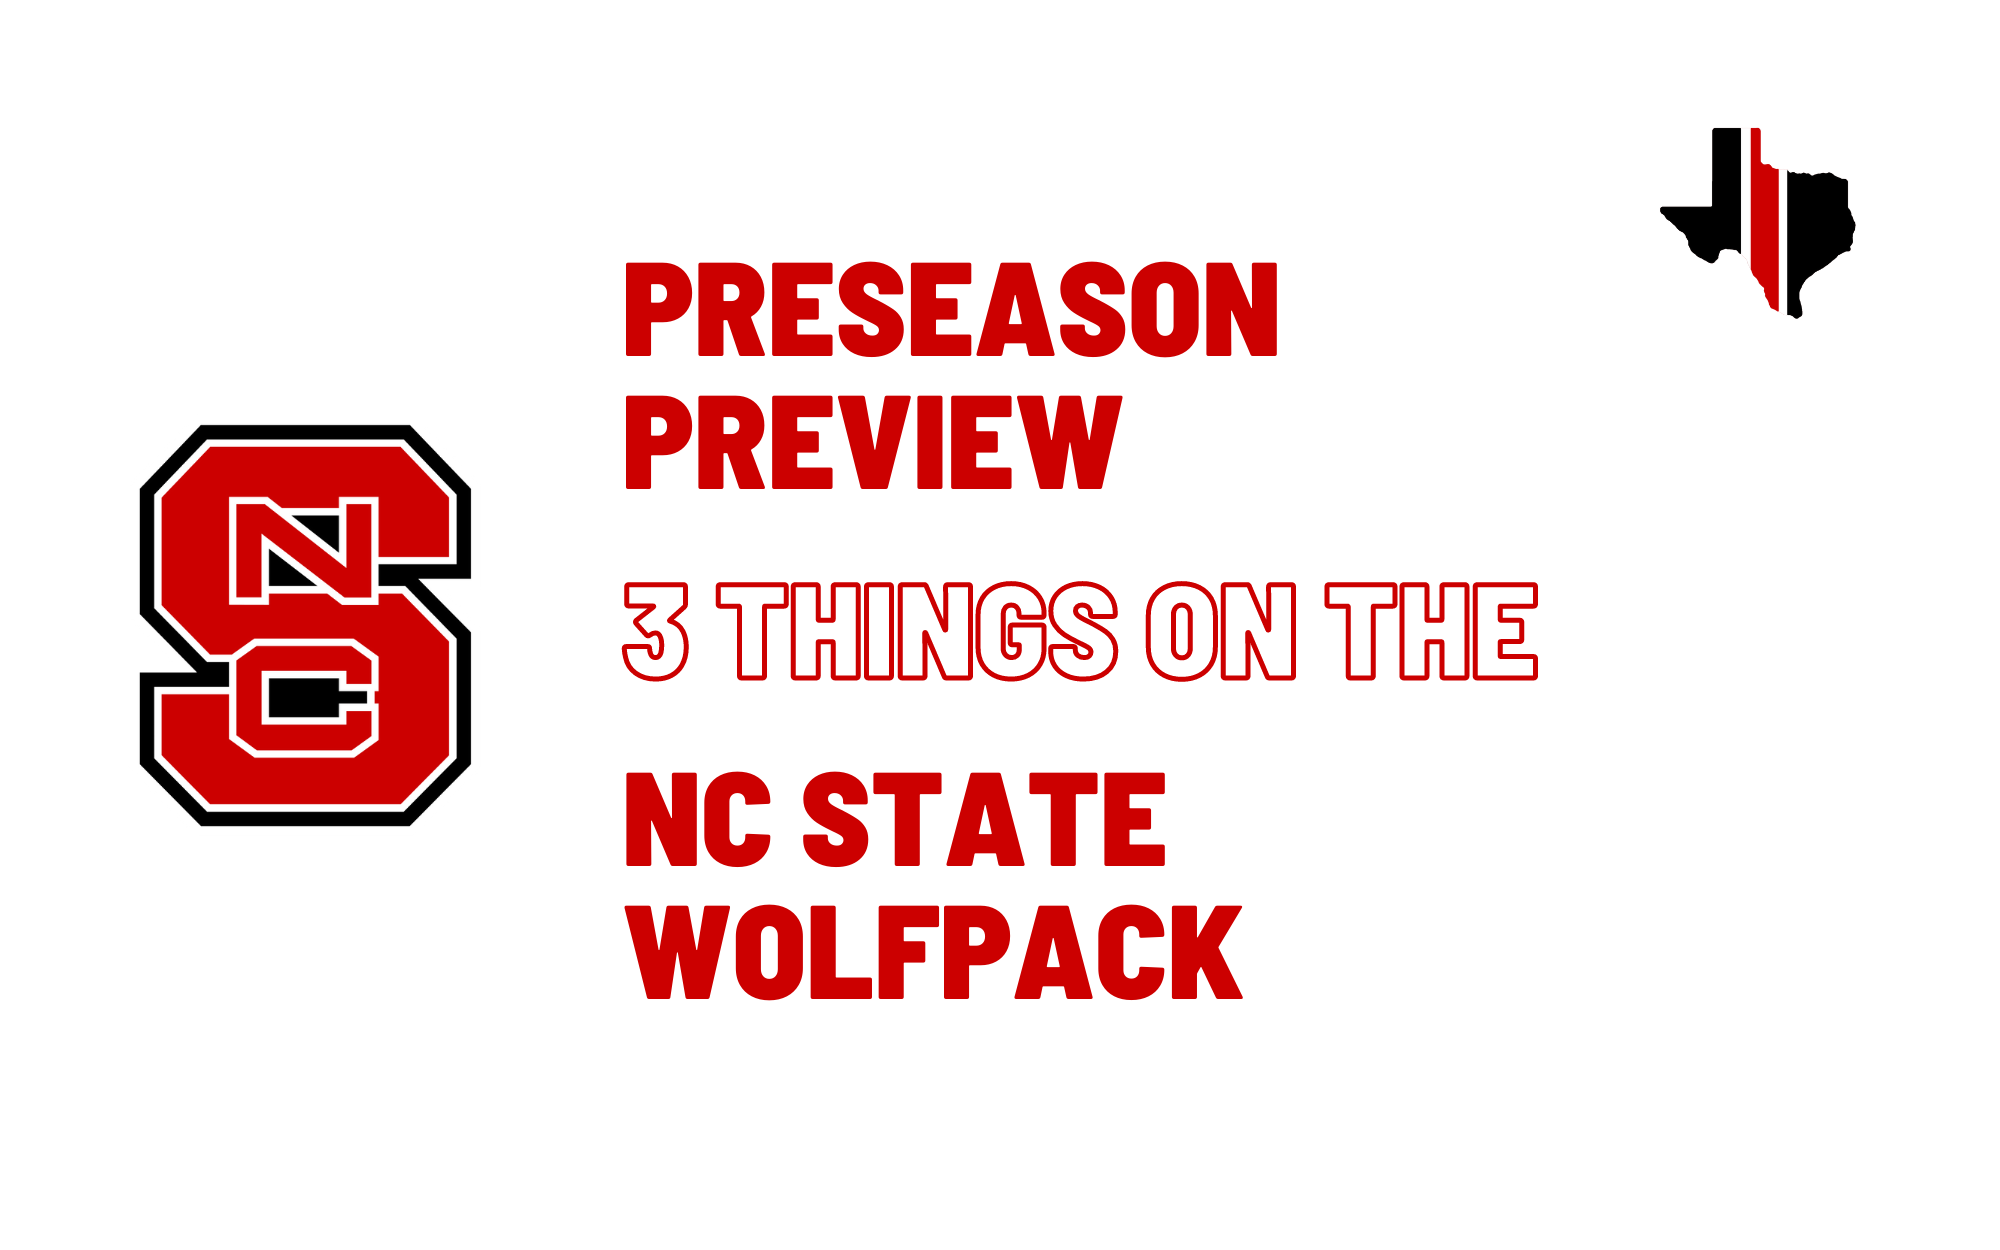 Preseason Preview | 3 Things on the NC State Wolfpack